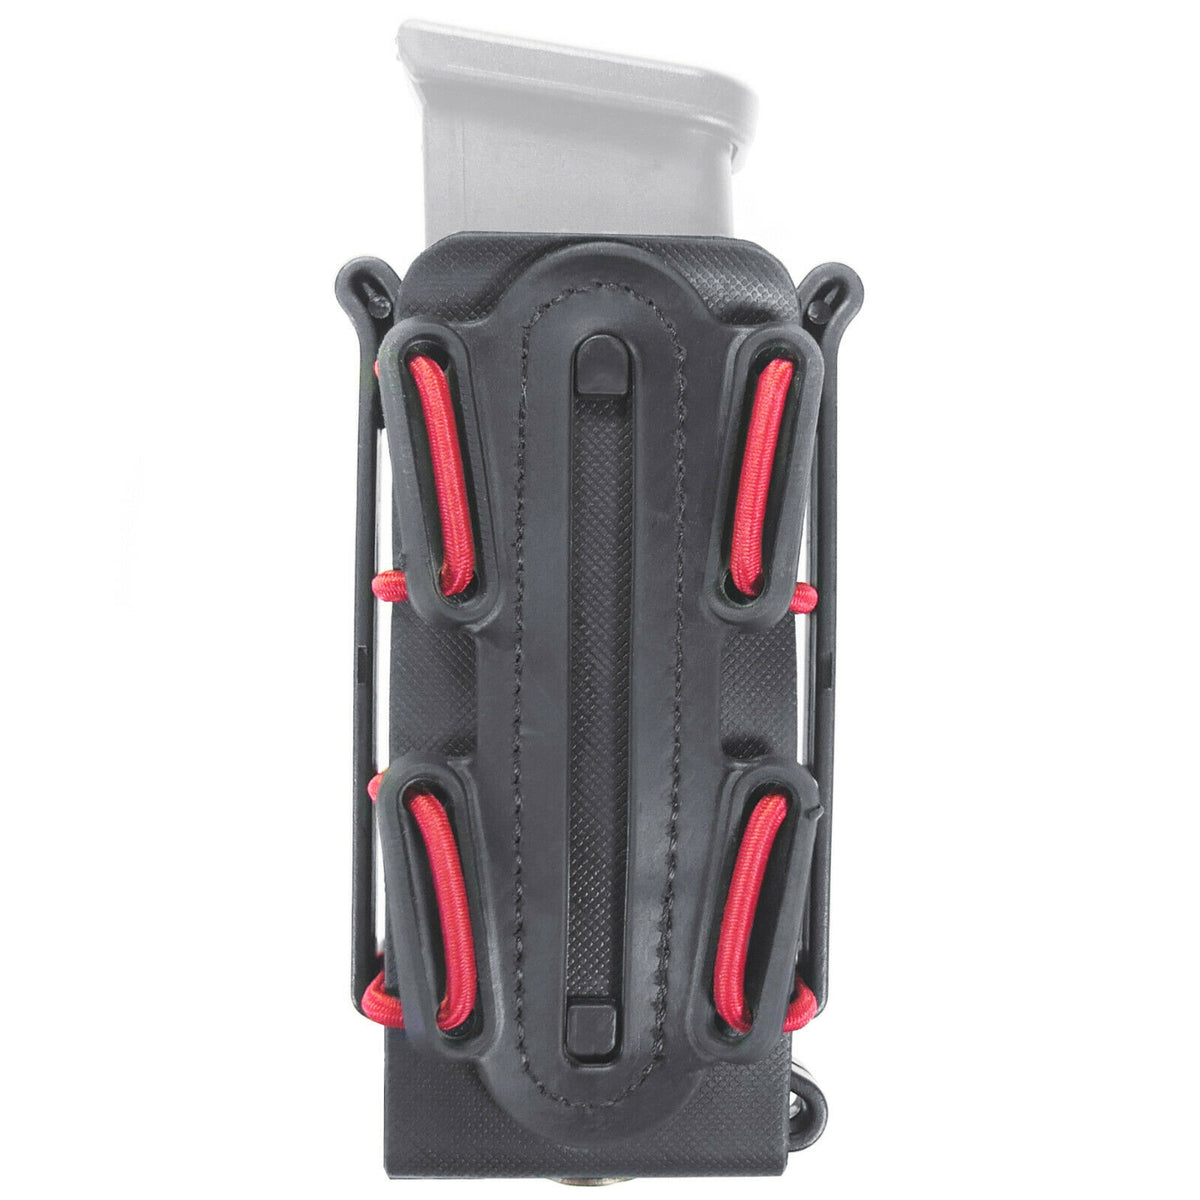 KTactical Tactical Pistol 9mm / 45acp Magazine Pouch for Molle System